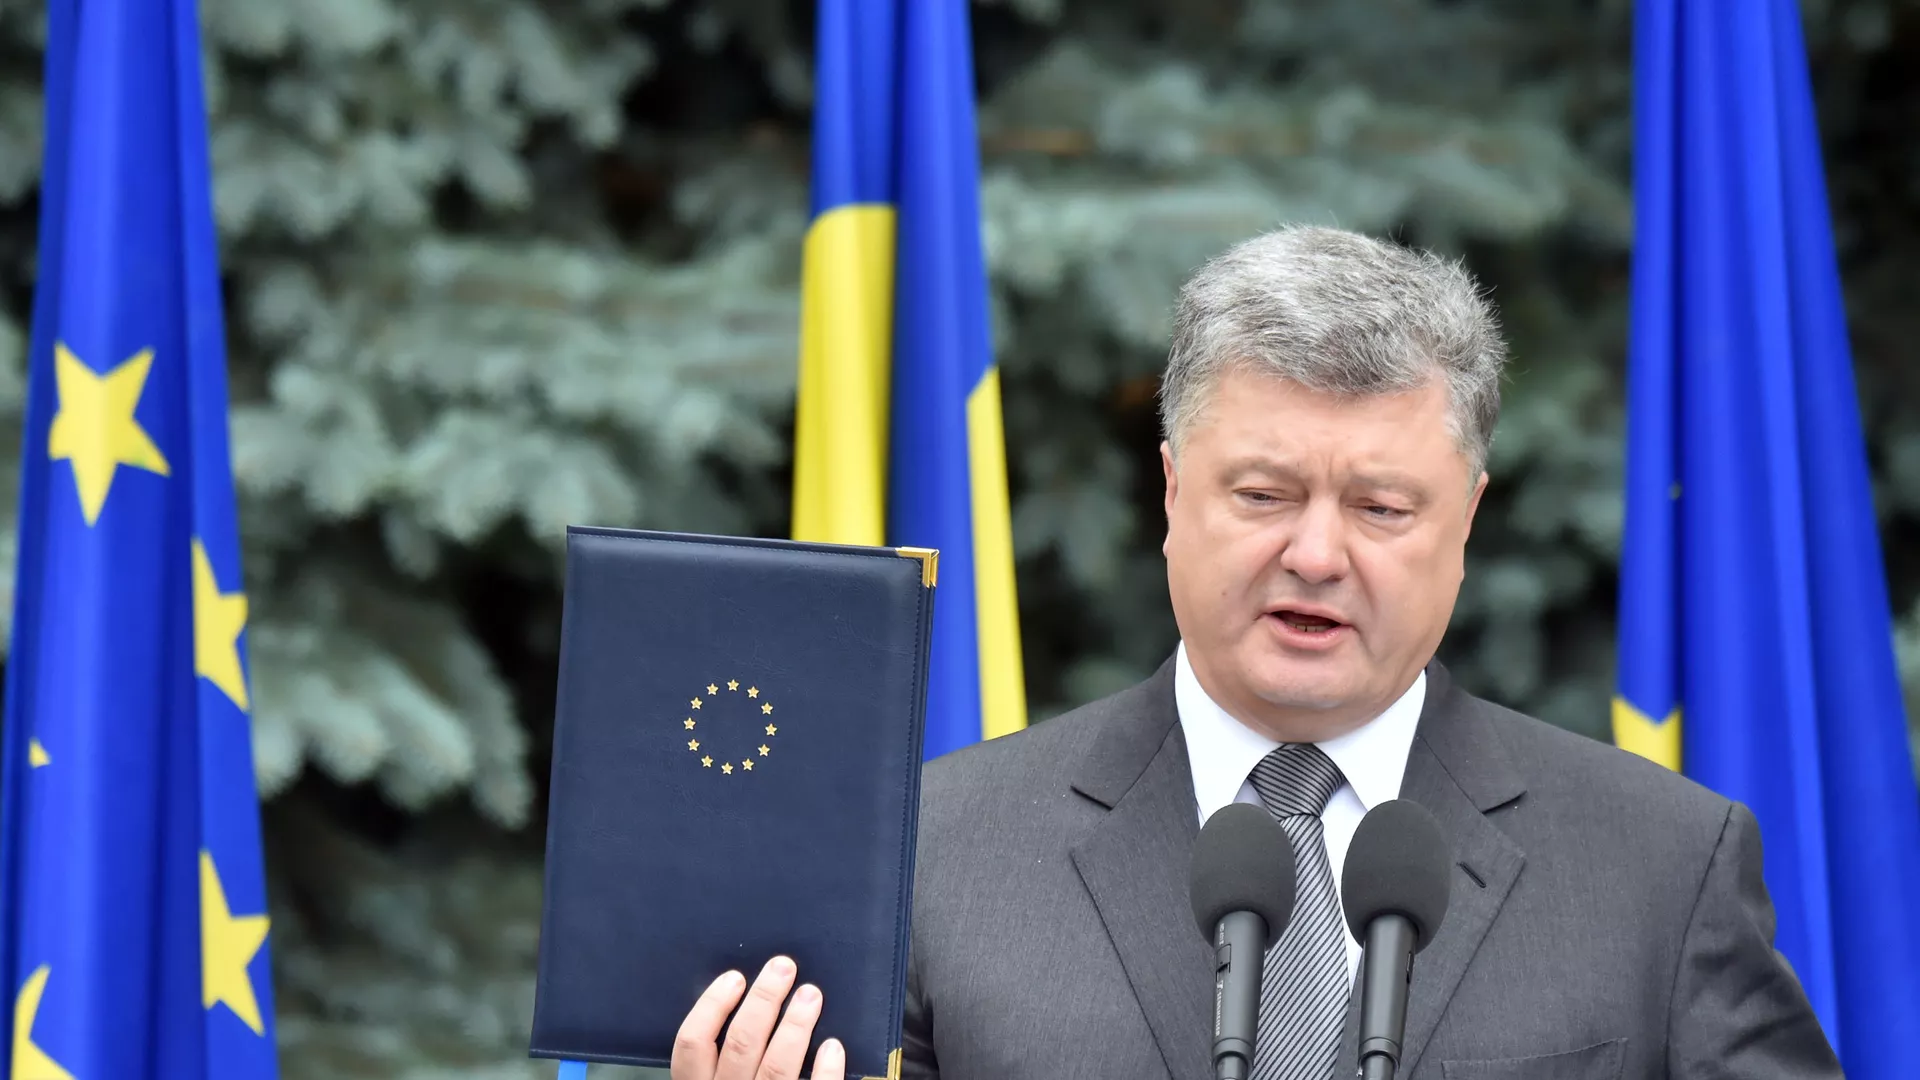 Russia puts current, former Ukrainian president on wanted list 